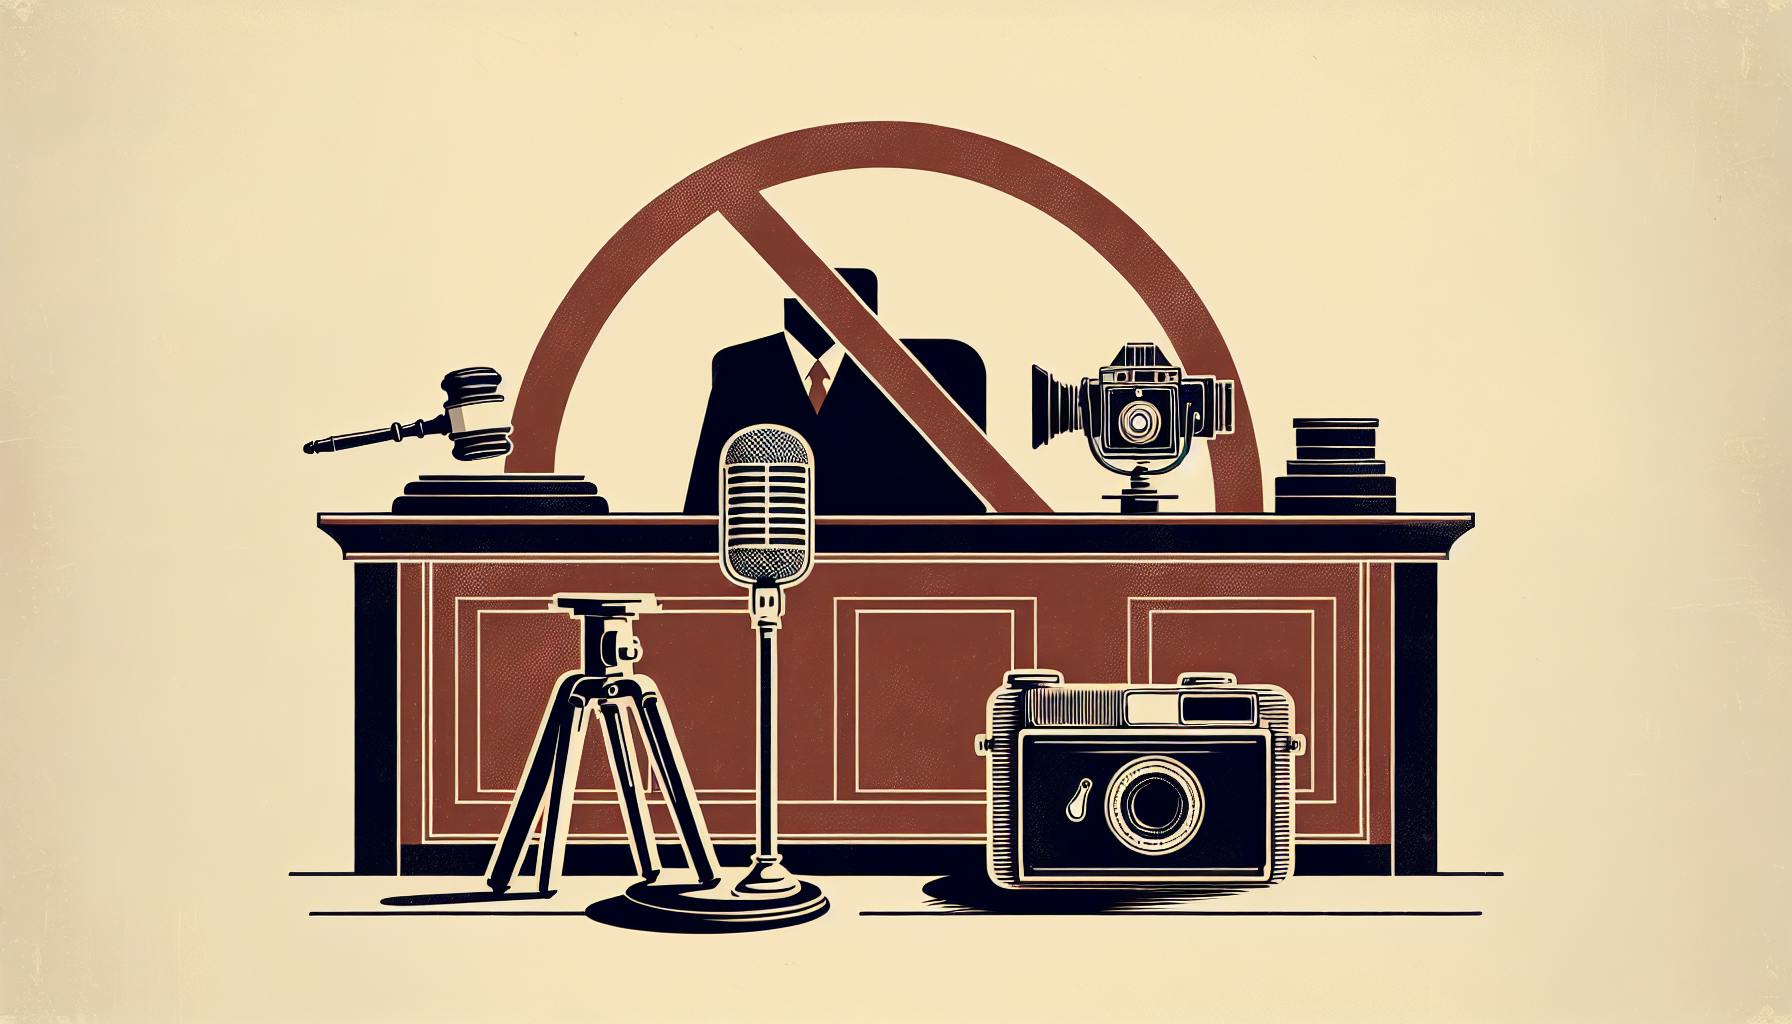 Federal Criminal Rule 53 Explained: Courtroom Photographing and Broadcasting Prohibited